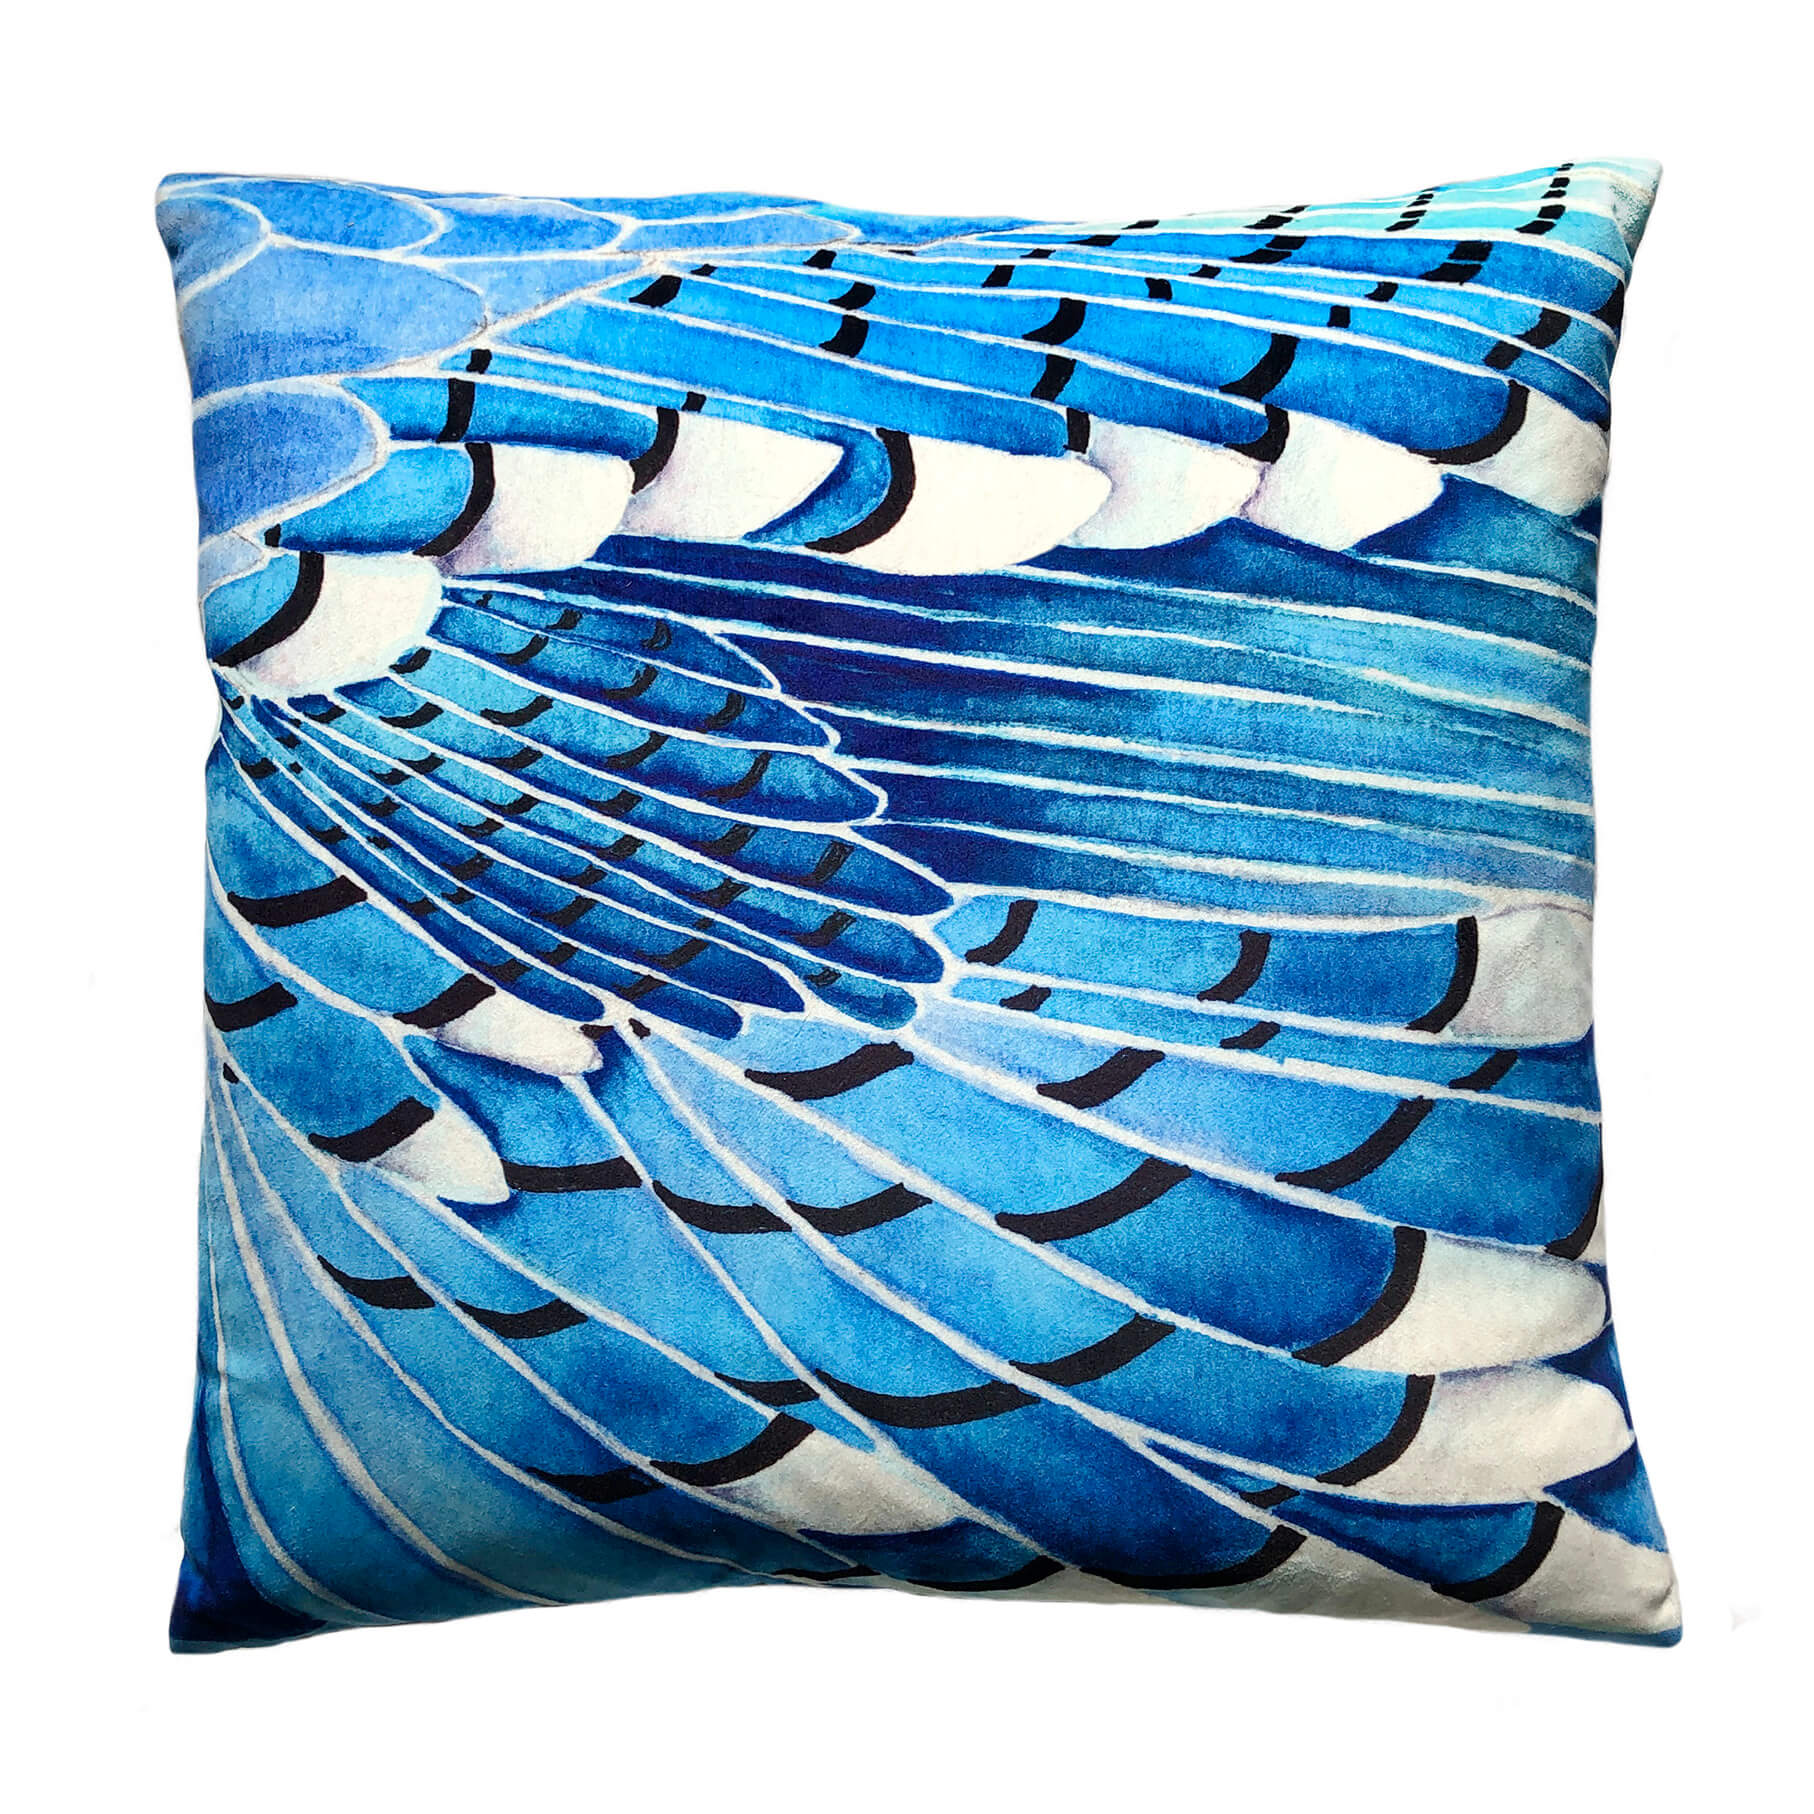 Blue Jay wing velvet cushion by Anna Jacobs